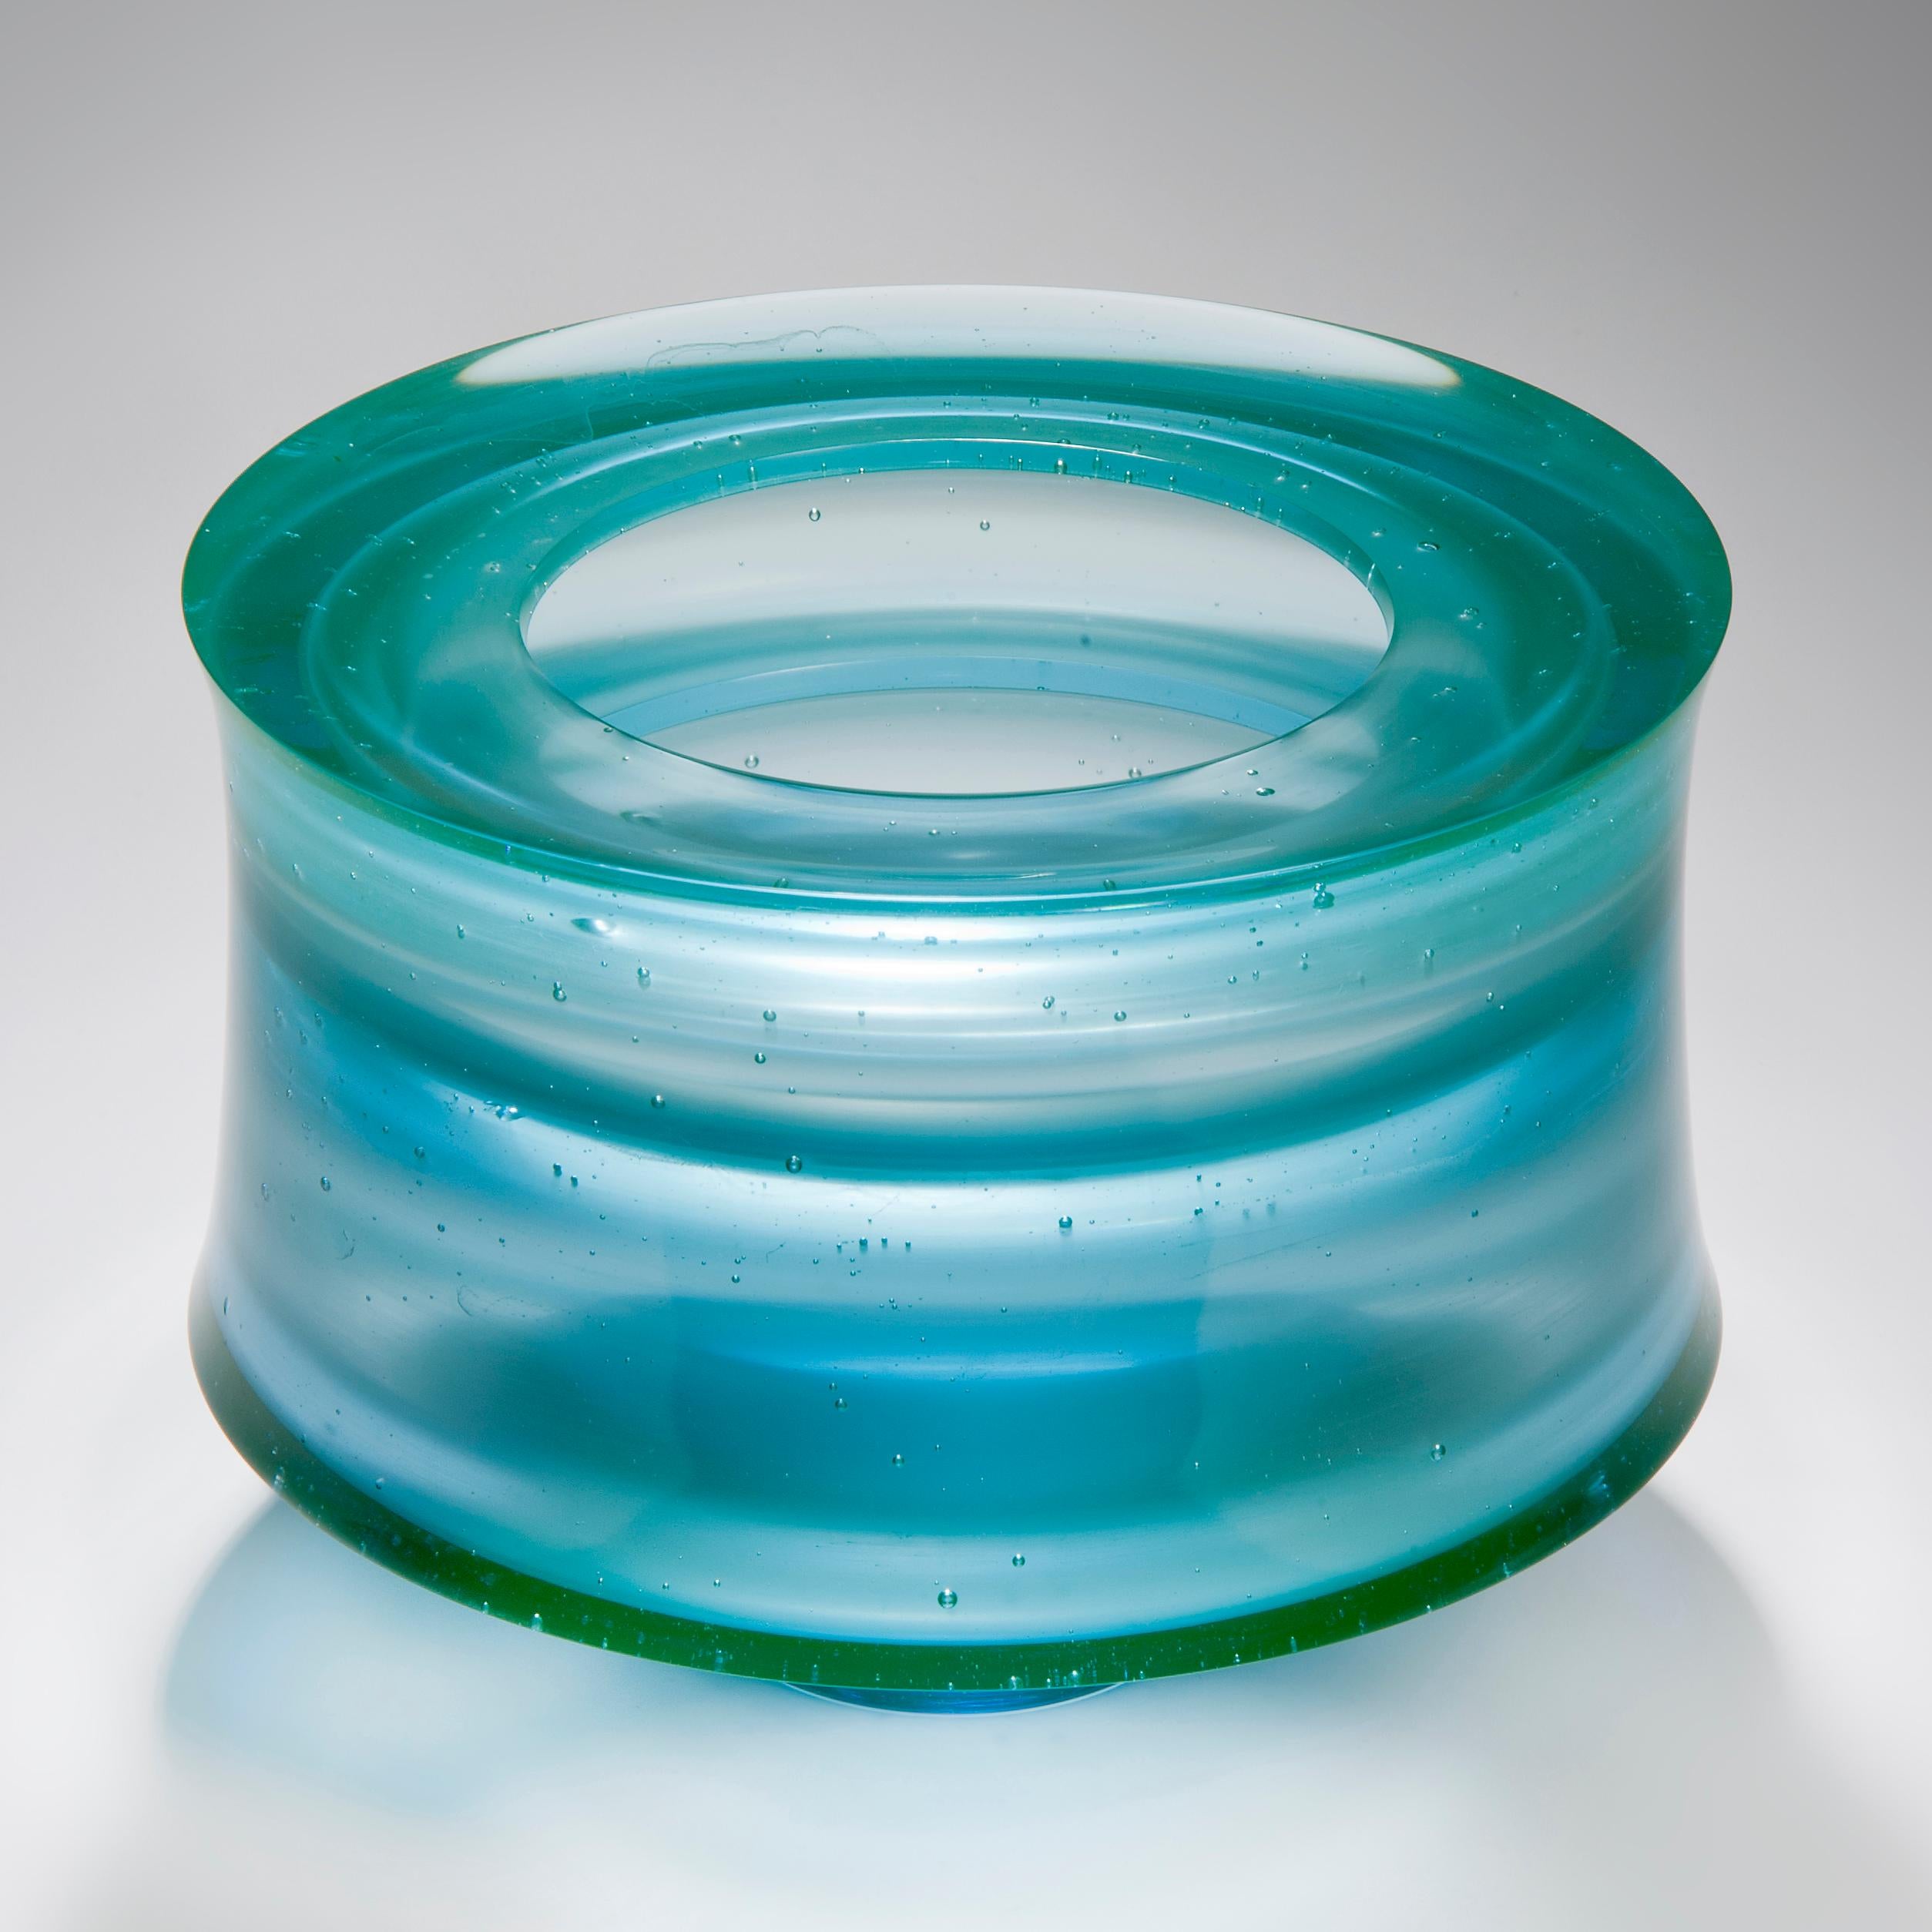 Modern Corymb, a Unique Aqua/Turquoise Glass Art Work and Centrepiece by Paul Stopler